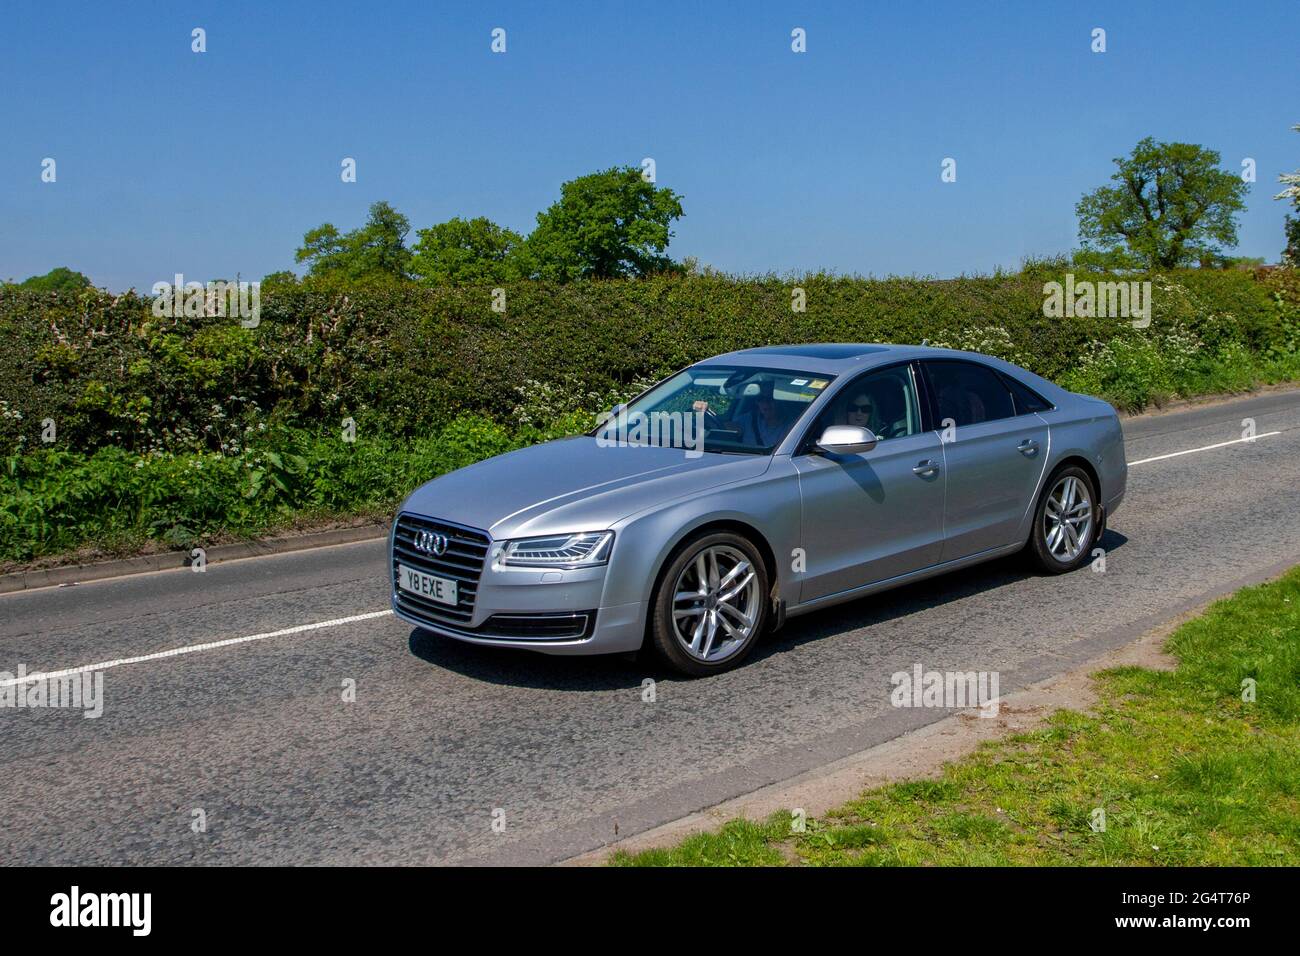 2015 silver Audi A8 2967cc diesel 4dr saloon, vehicular traffic, moving vehicles, cars, vehicle driving on UK roads, motors, motoring, road network, Stock Photo